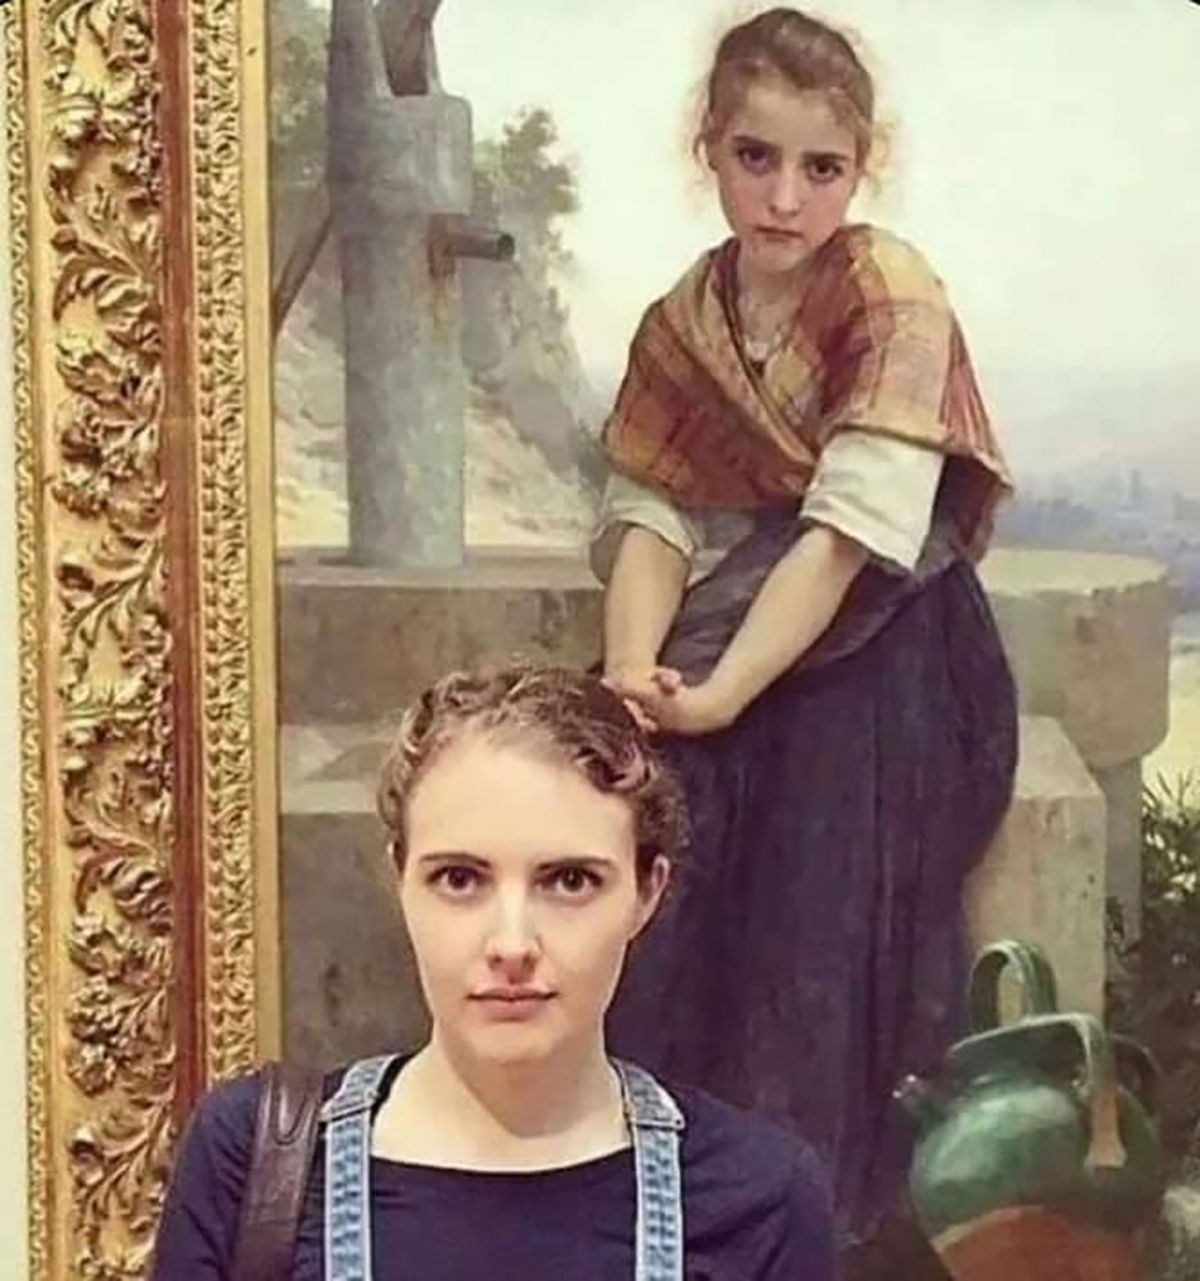 25 People Who Look Like Famous Pieces of Artwork